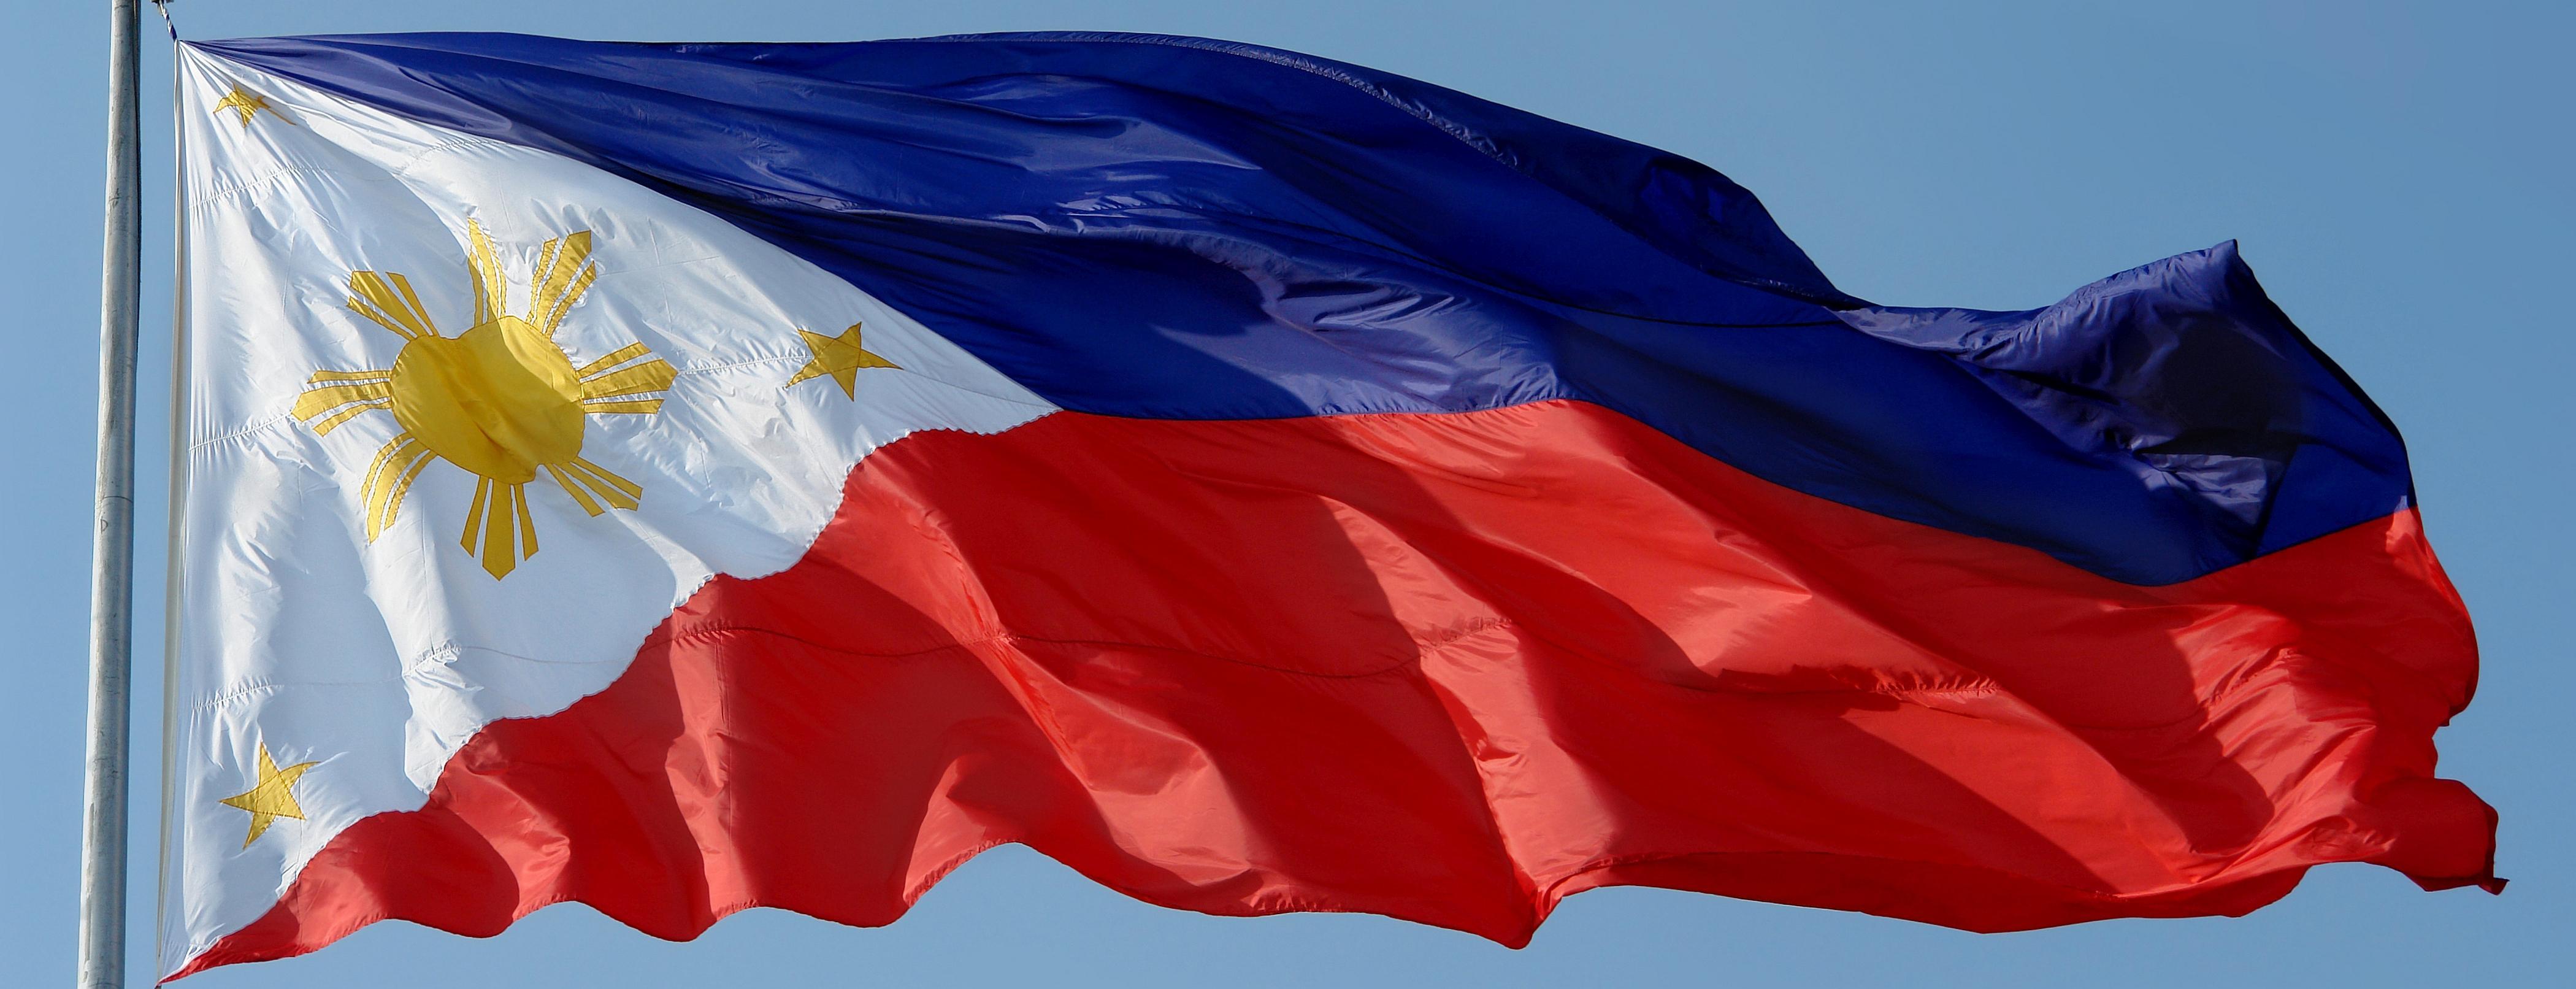 Flag Of The Philippines HD Wallpaper. Background Imagex1612